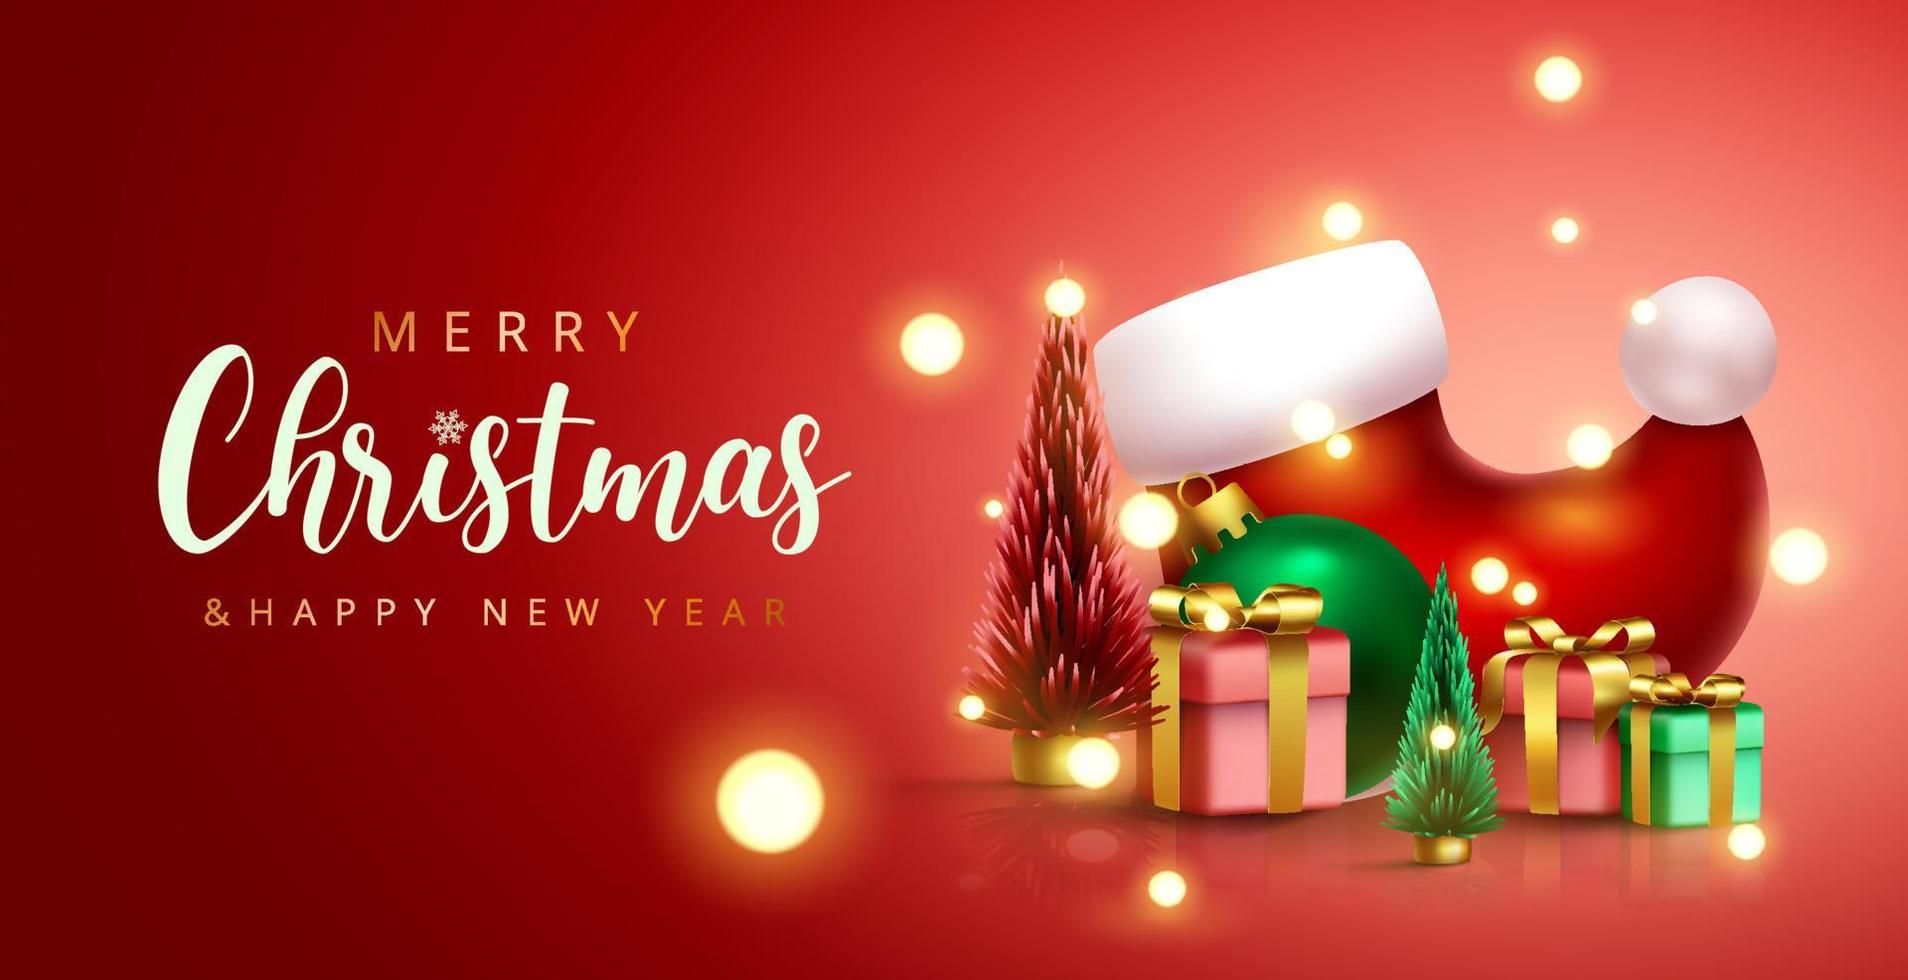 Christmas greeting vector design. Merry christmas and happy new year text with santa skating shoes, gifts and floating lights miniature elements for xmas decoration. Vector illustration